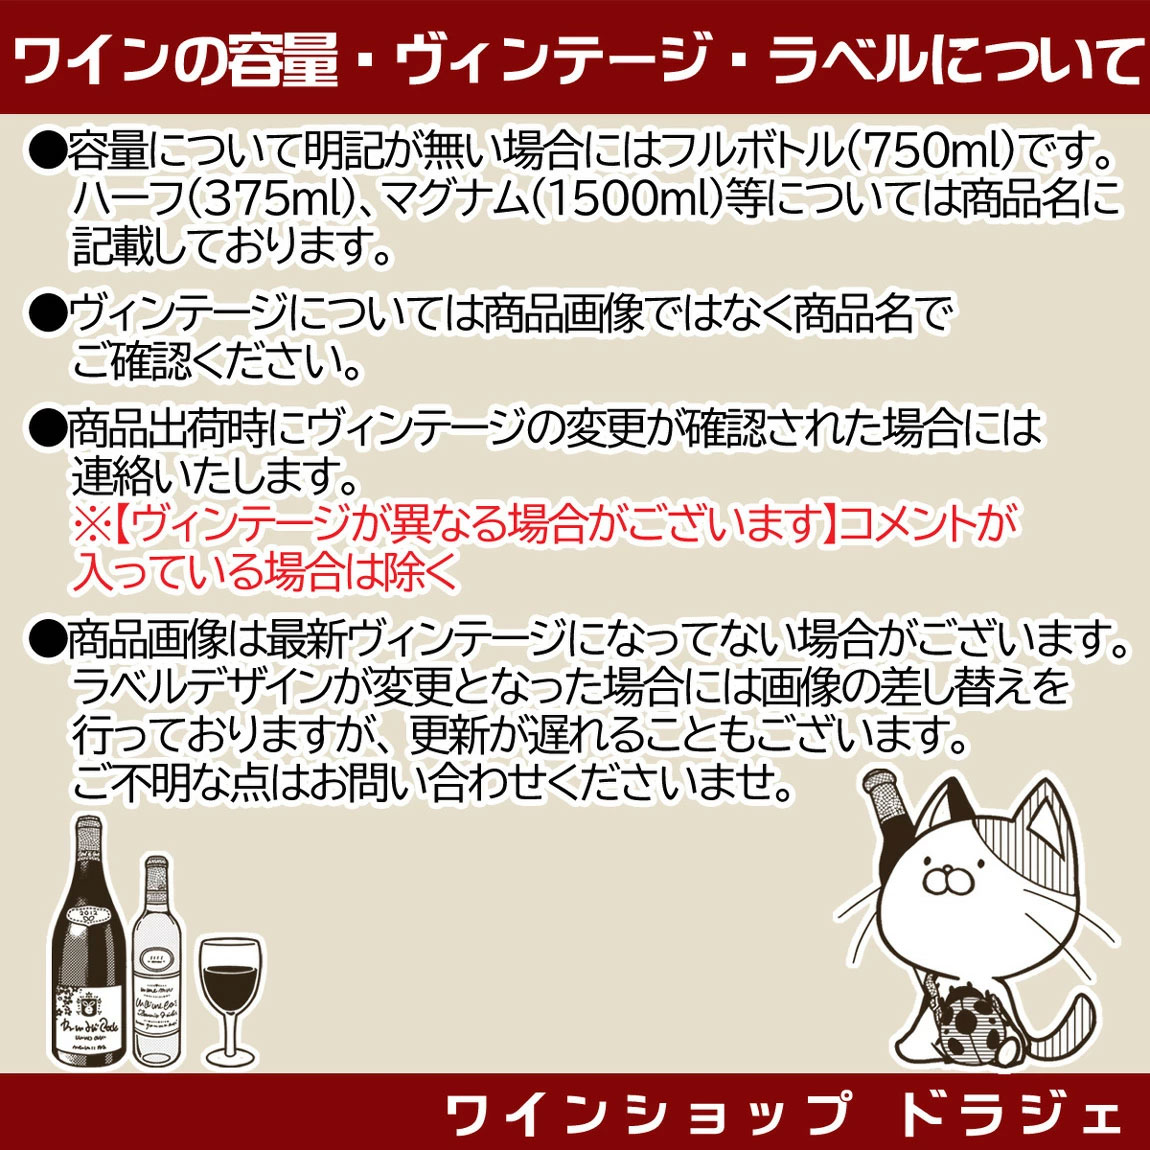 h[k@smEO@2019@LOEGXe[g@@<br>Domaine Pinot Gris / King Estate  Xs[ho